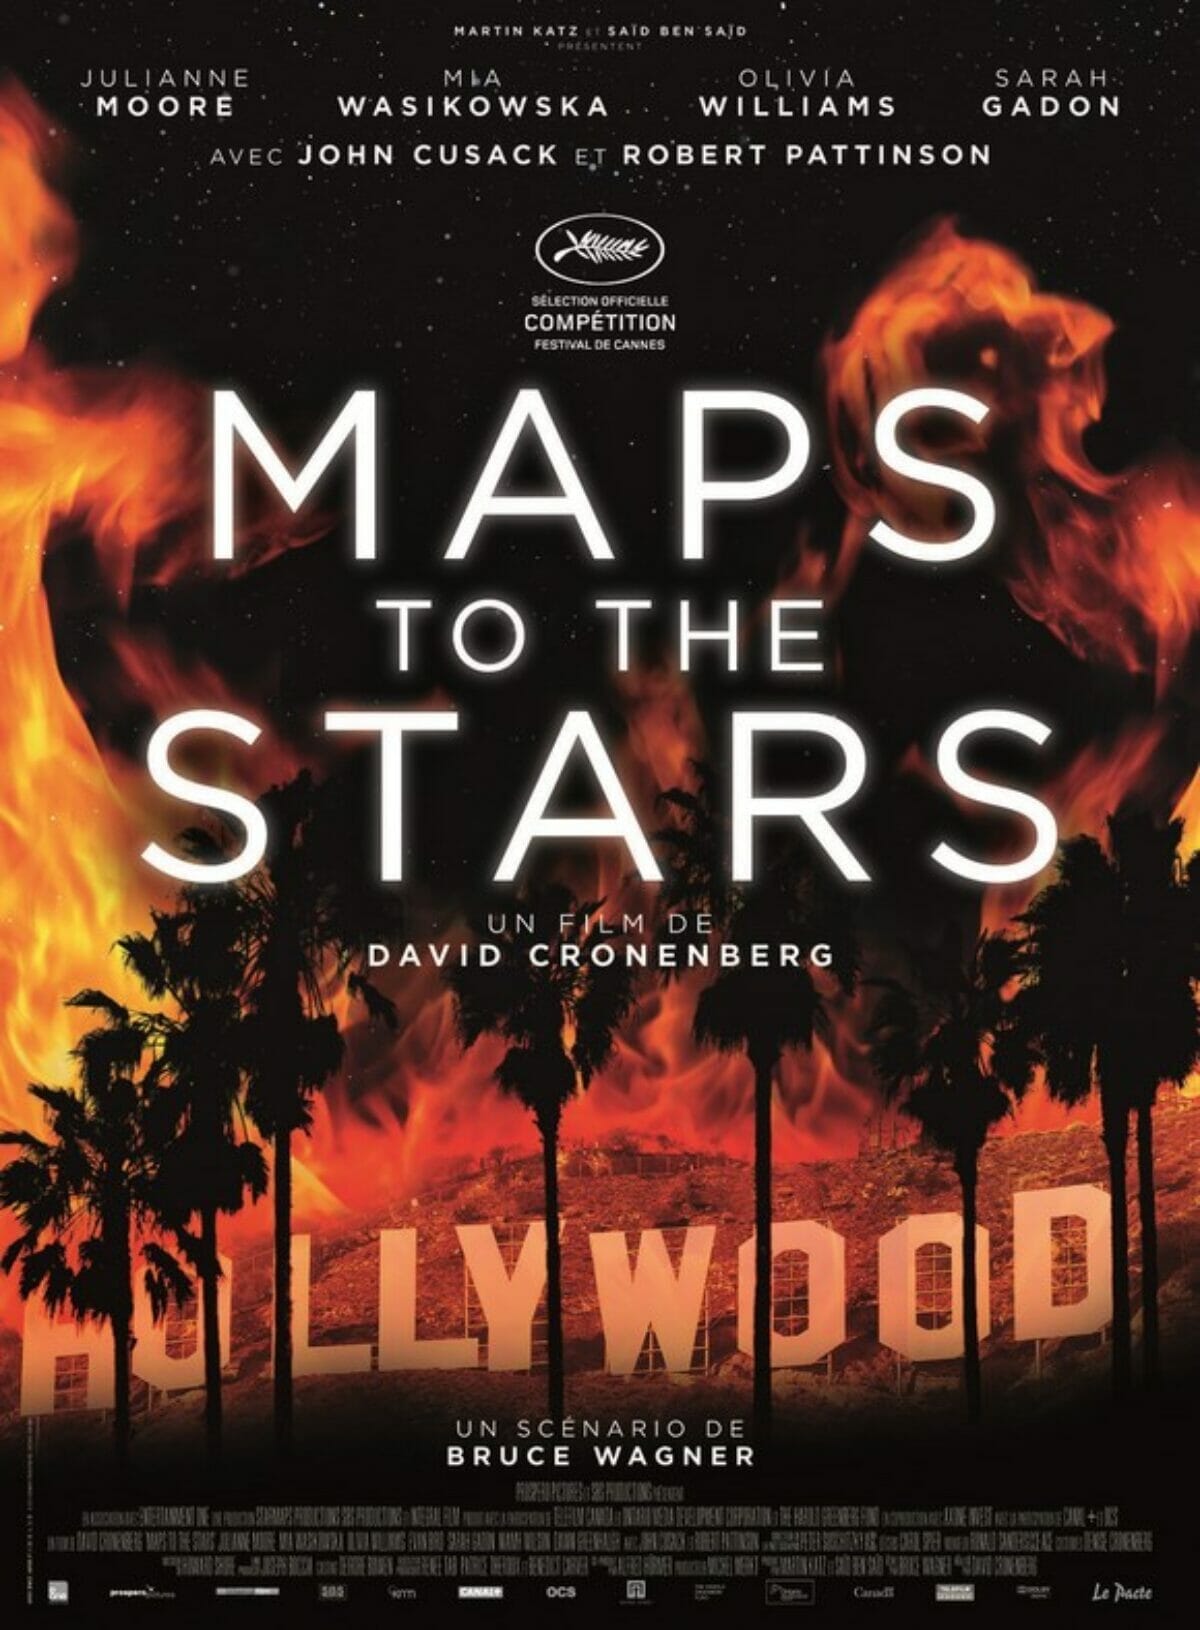 Maps-to-the-stars-affiche-france